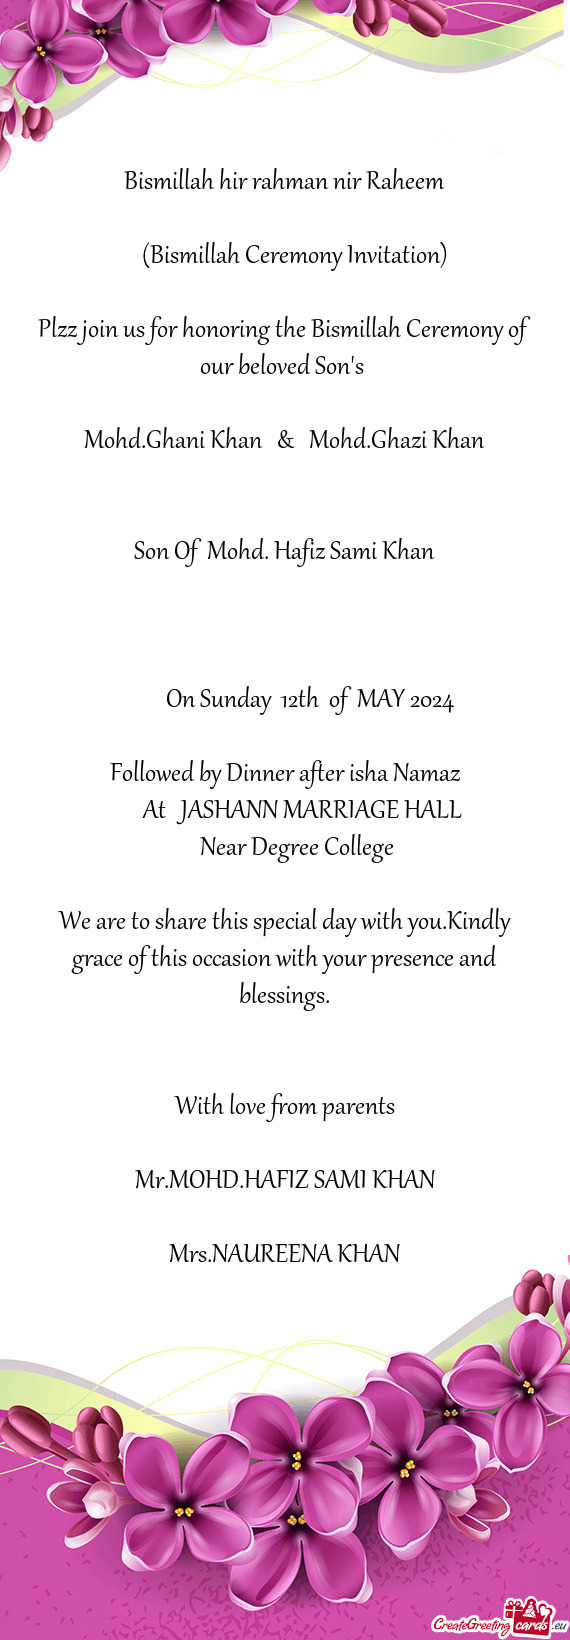 Plzz join us for honoring the Bismillah Ceremony of our beloved Son